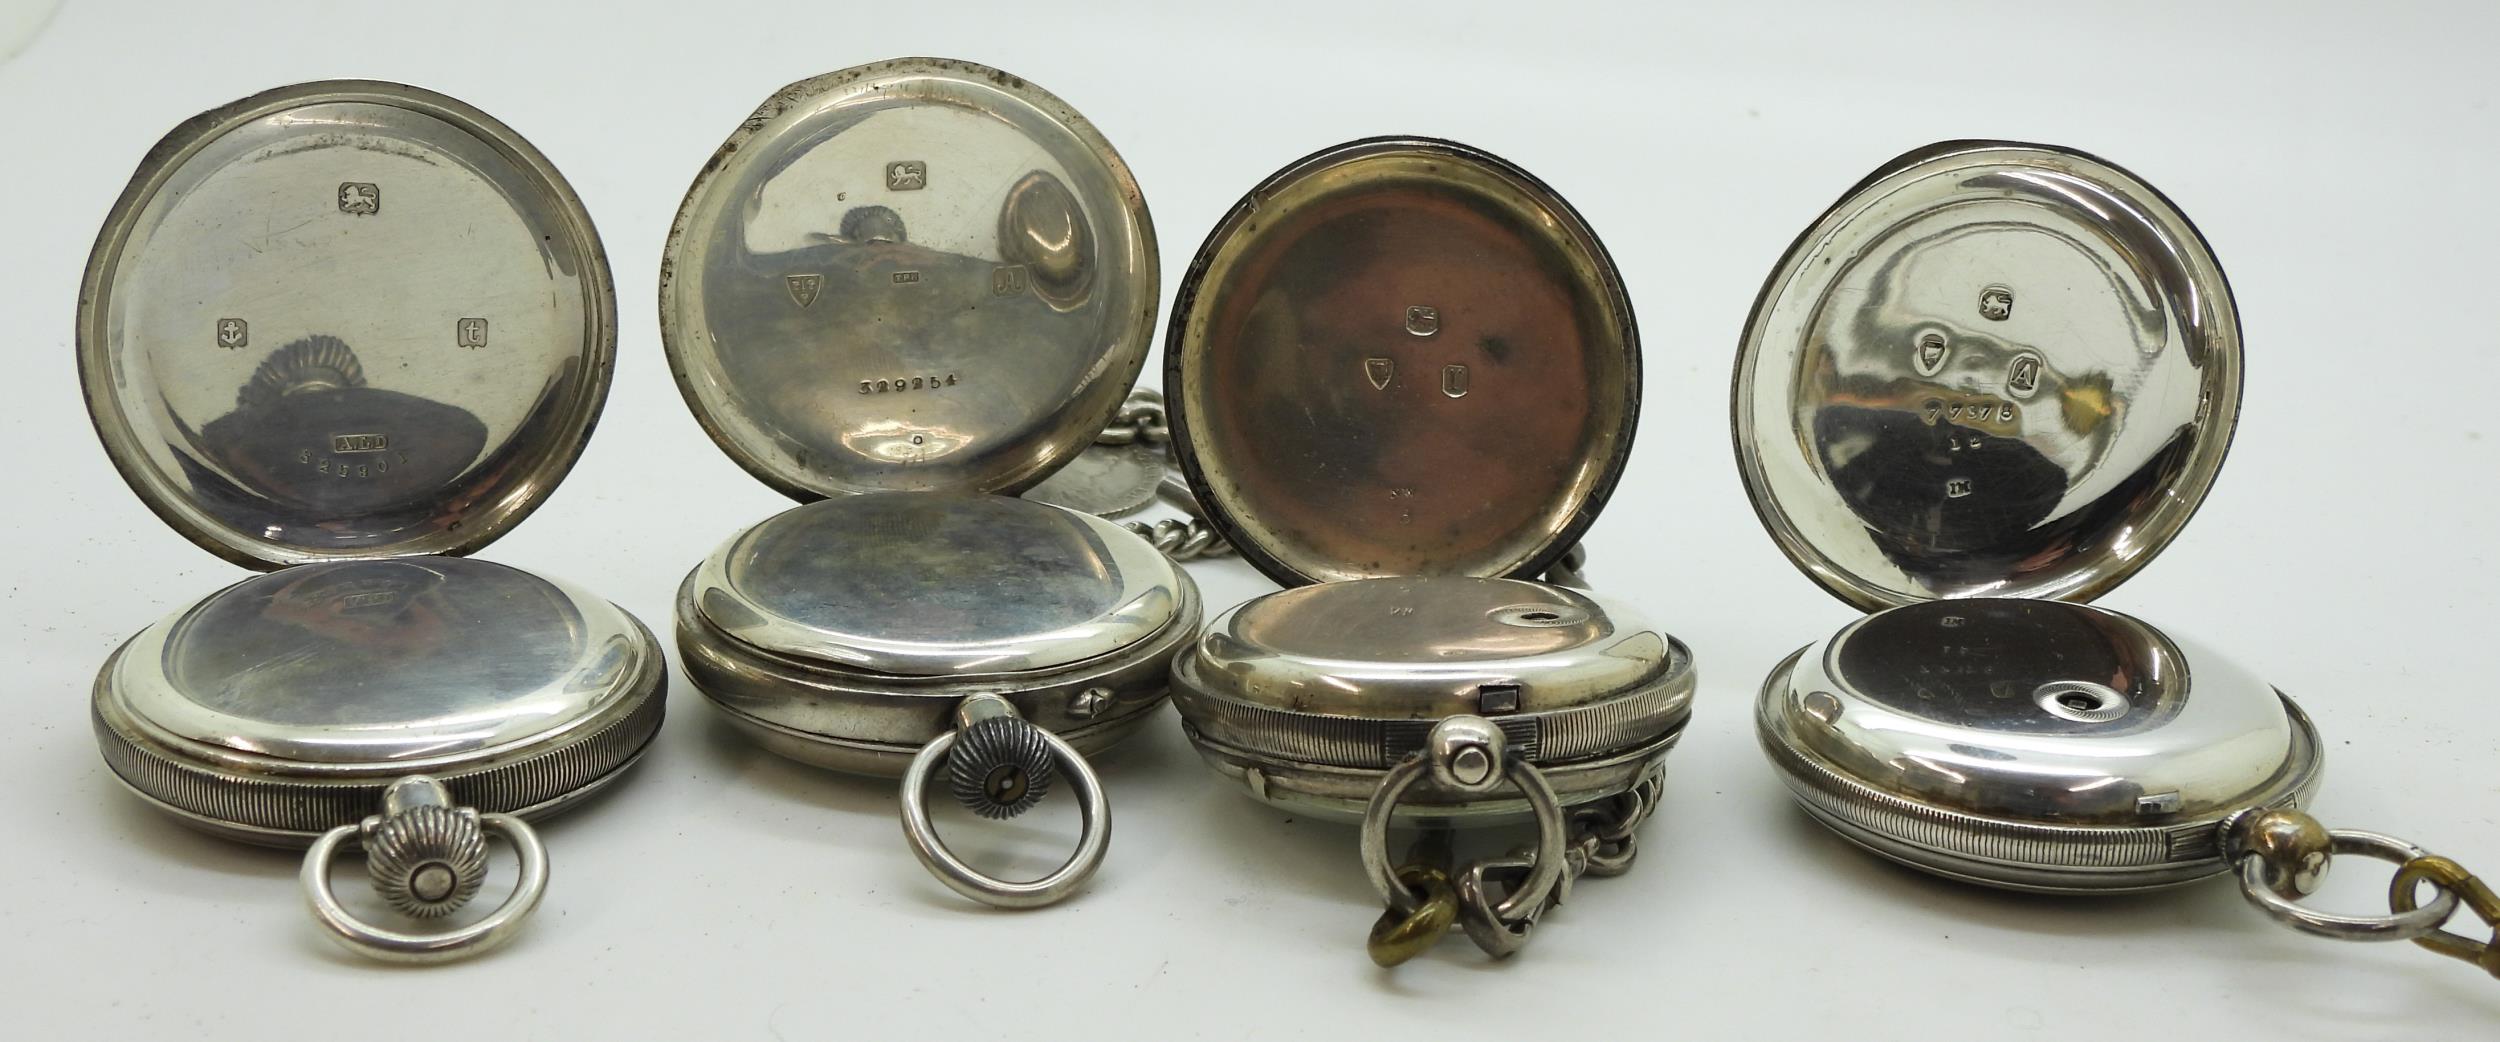 Four silver pocket watches, a silver full hunter, hallmarked London 1876, a Waltham full hunter , - Image 4 of 5